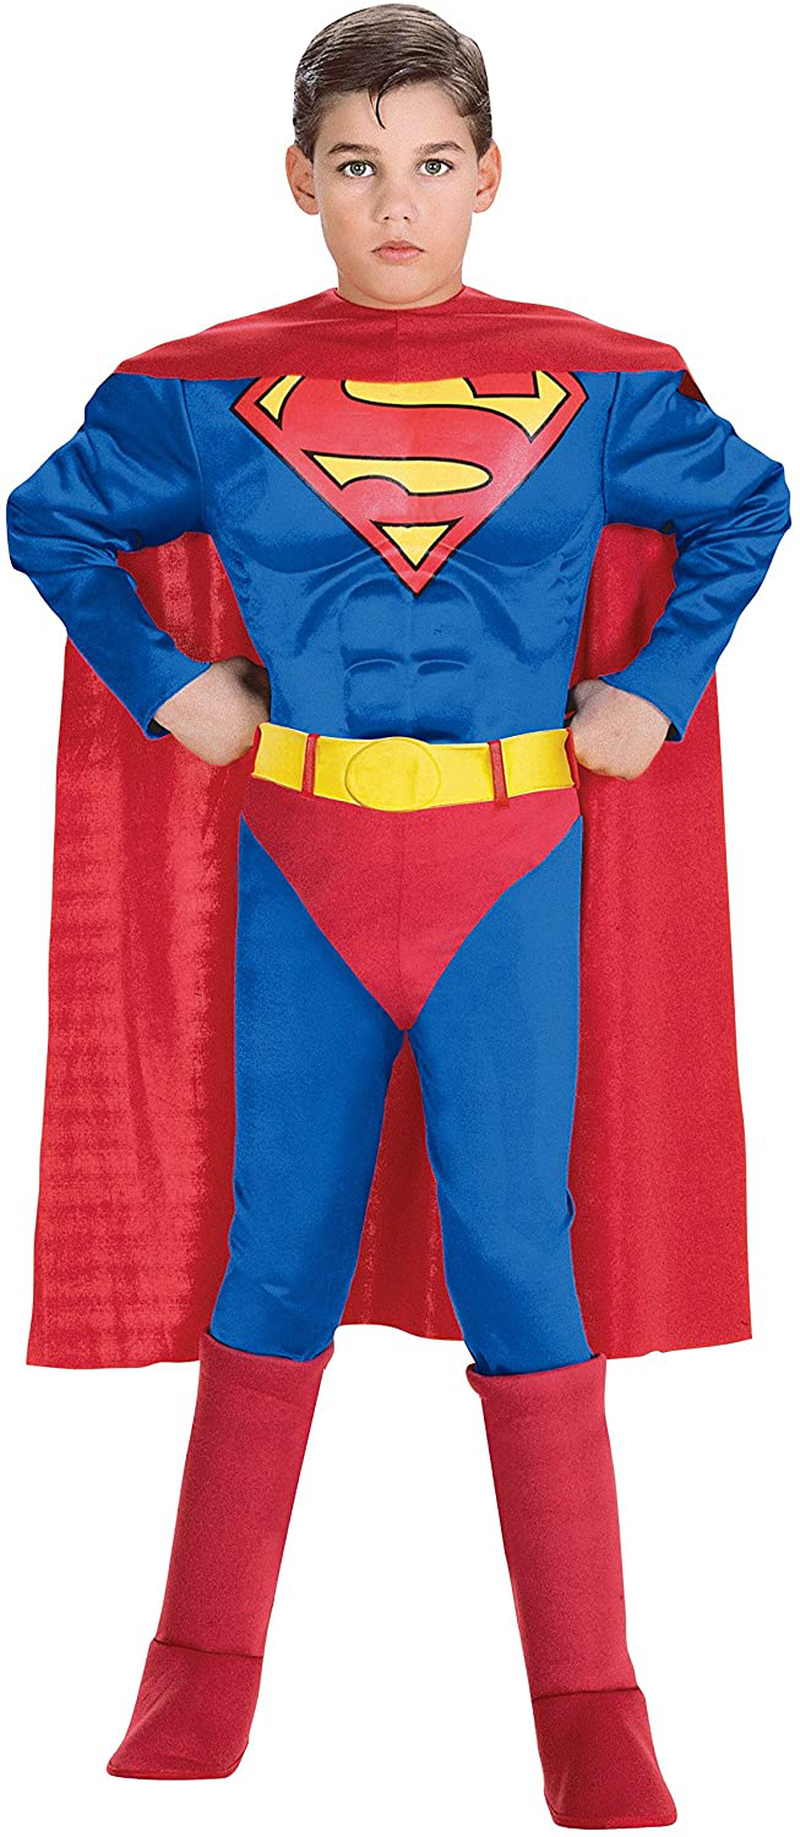 Super DC Heroes Deluxe Muscle Chest Superman Costume, Toddler Apparel & Accessories > Costumes & Accessories > Costumes Rubie's Standard Packaging Large 